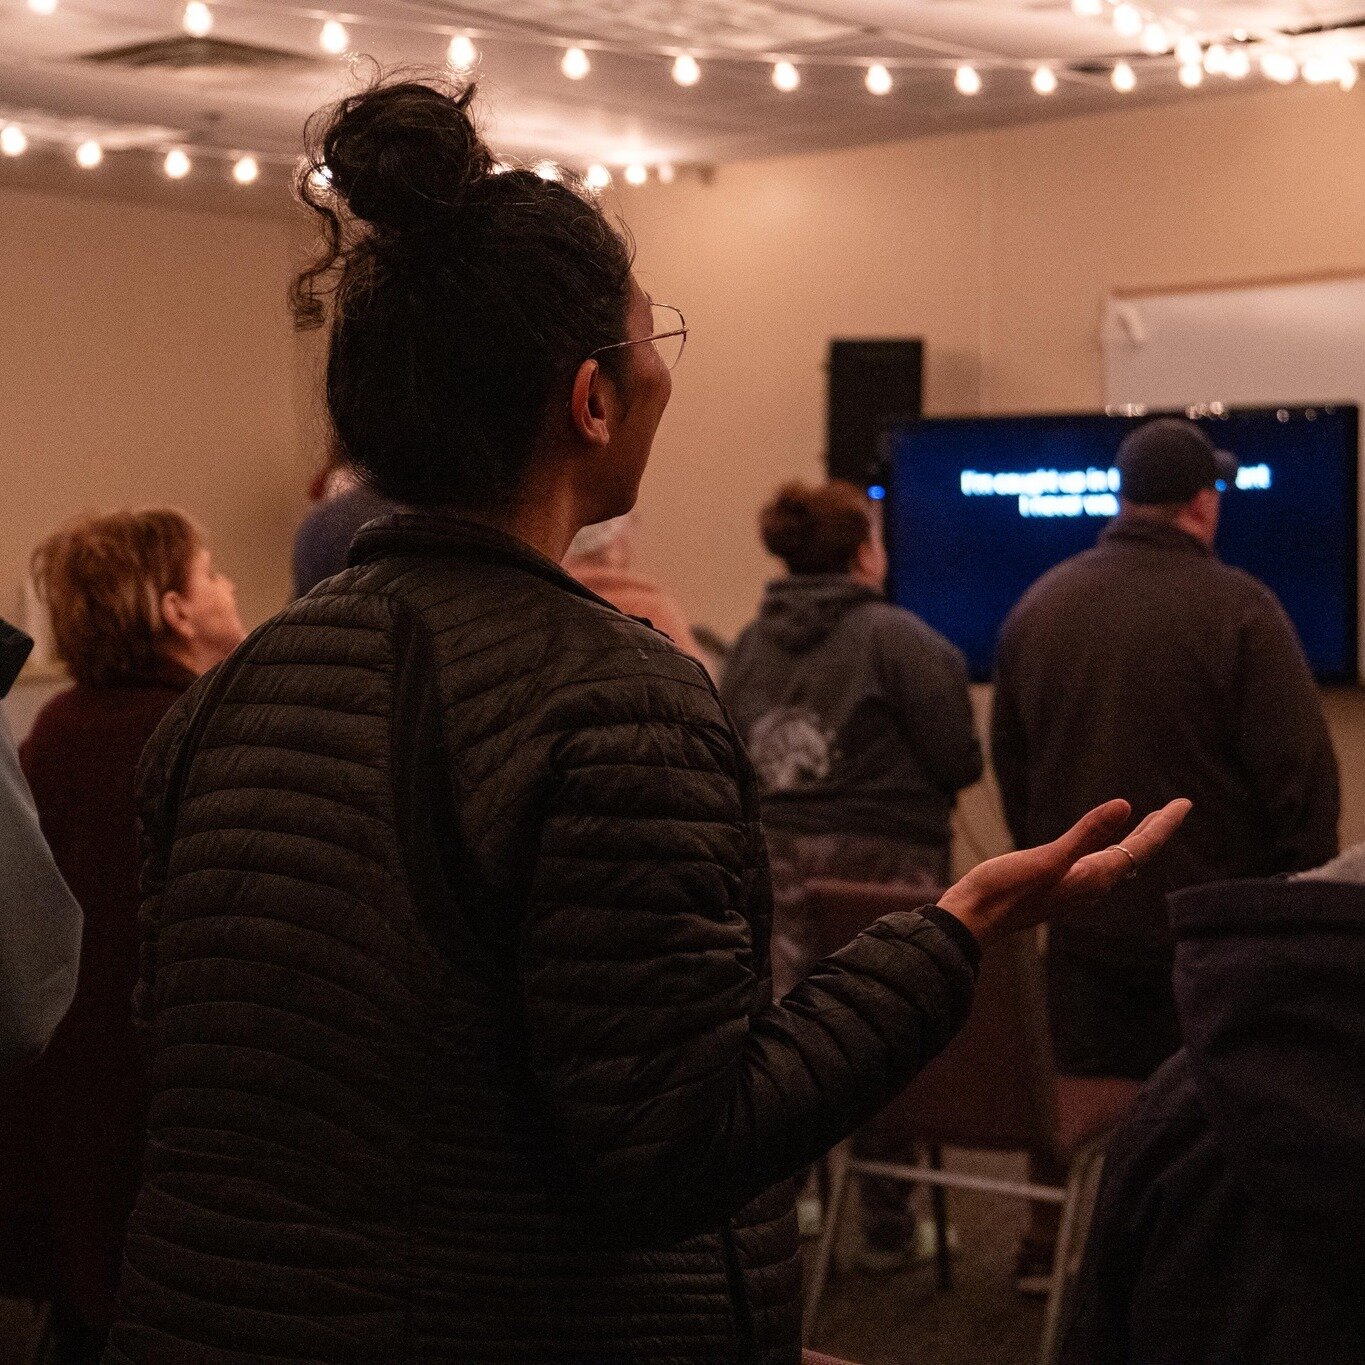 6 am gatherings are challenging, but we are so grateful for these Spirit-led times of prayer and worship. One meeting left tomorrow morning before we break our fast on Sunday. We hope to see you there!

#earlymornings #21days #21daysofprayerandfastin